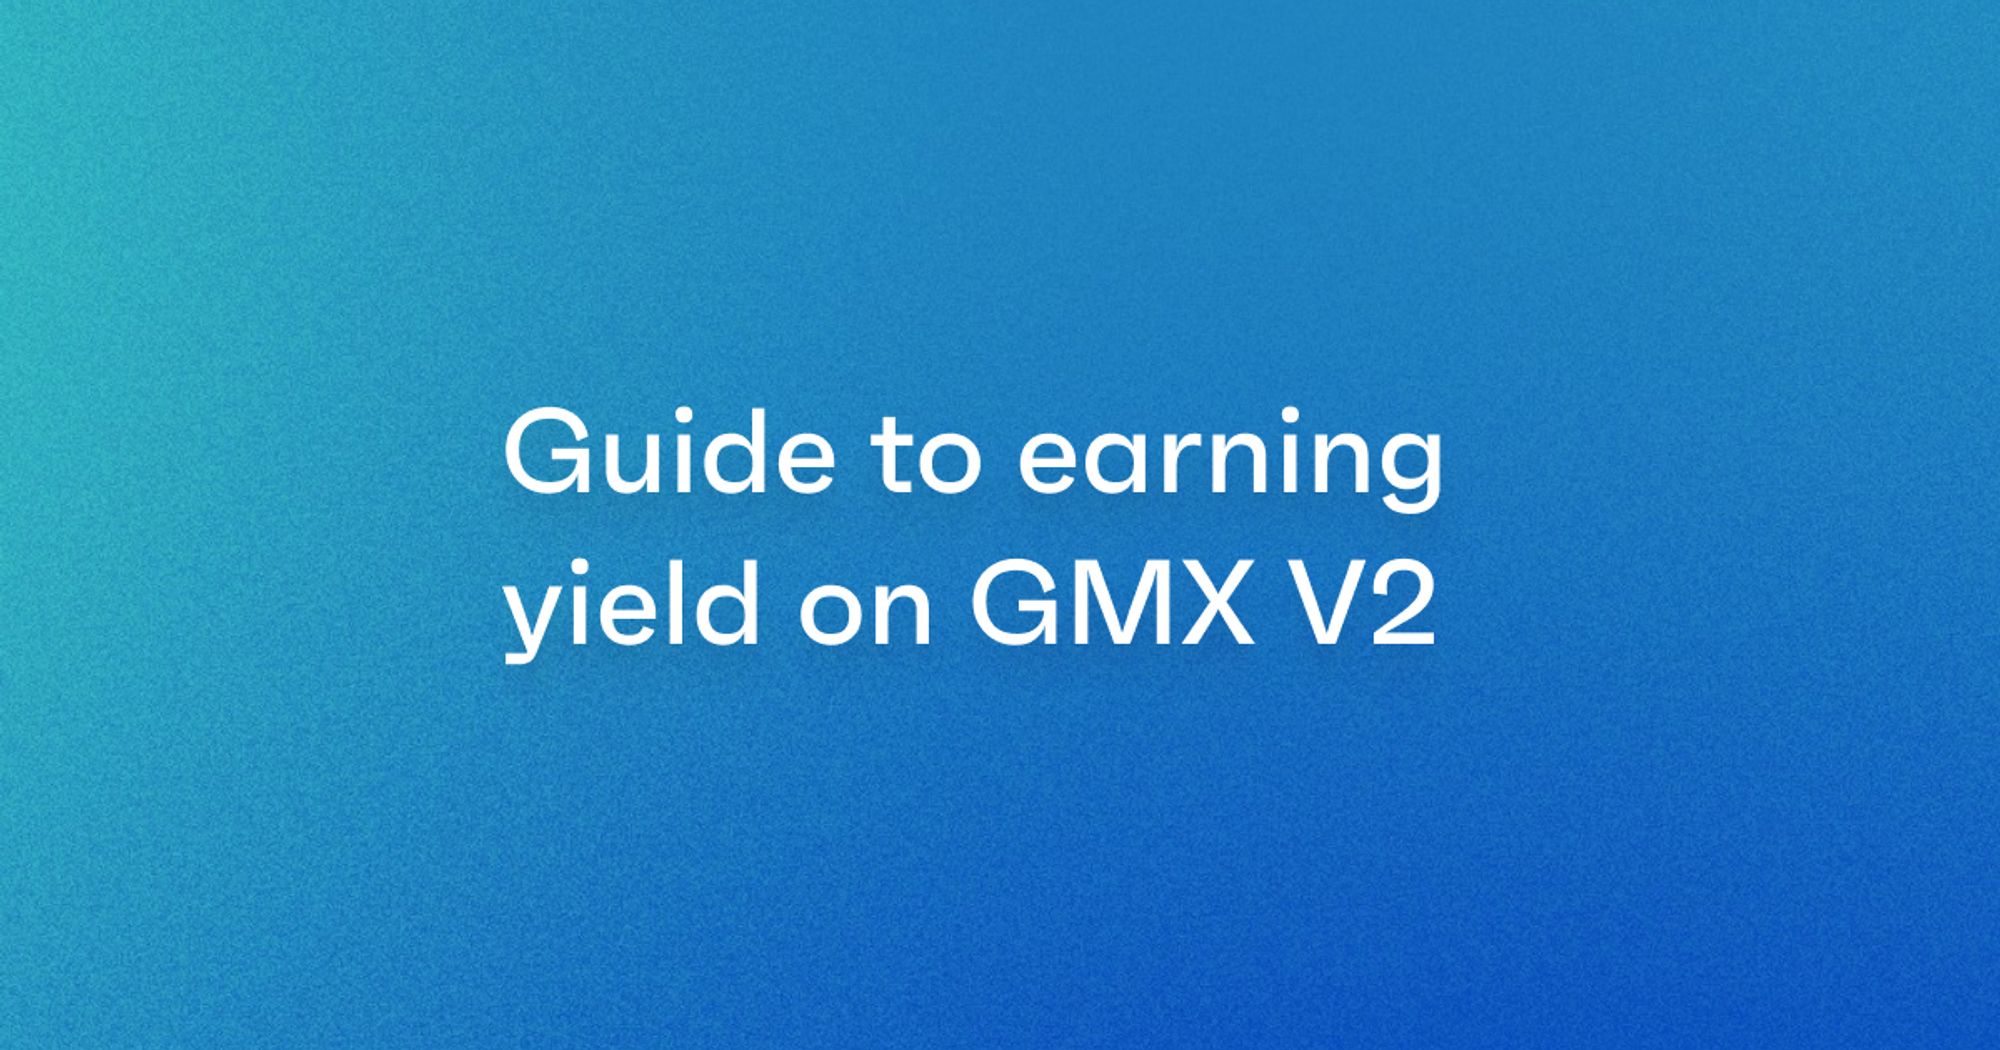 Guide to earning yield on GMX V2 blog cover image